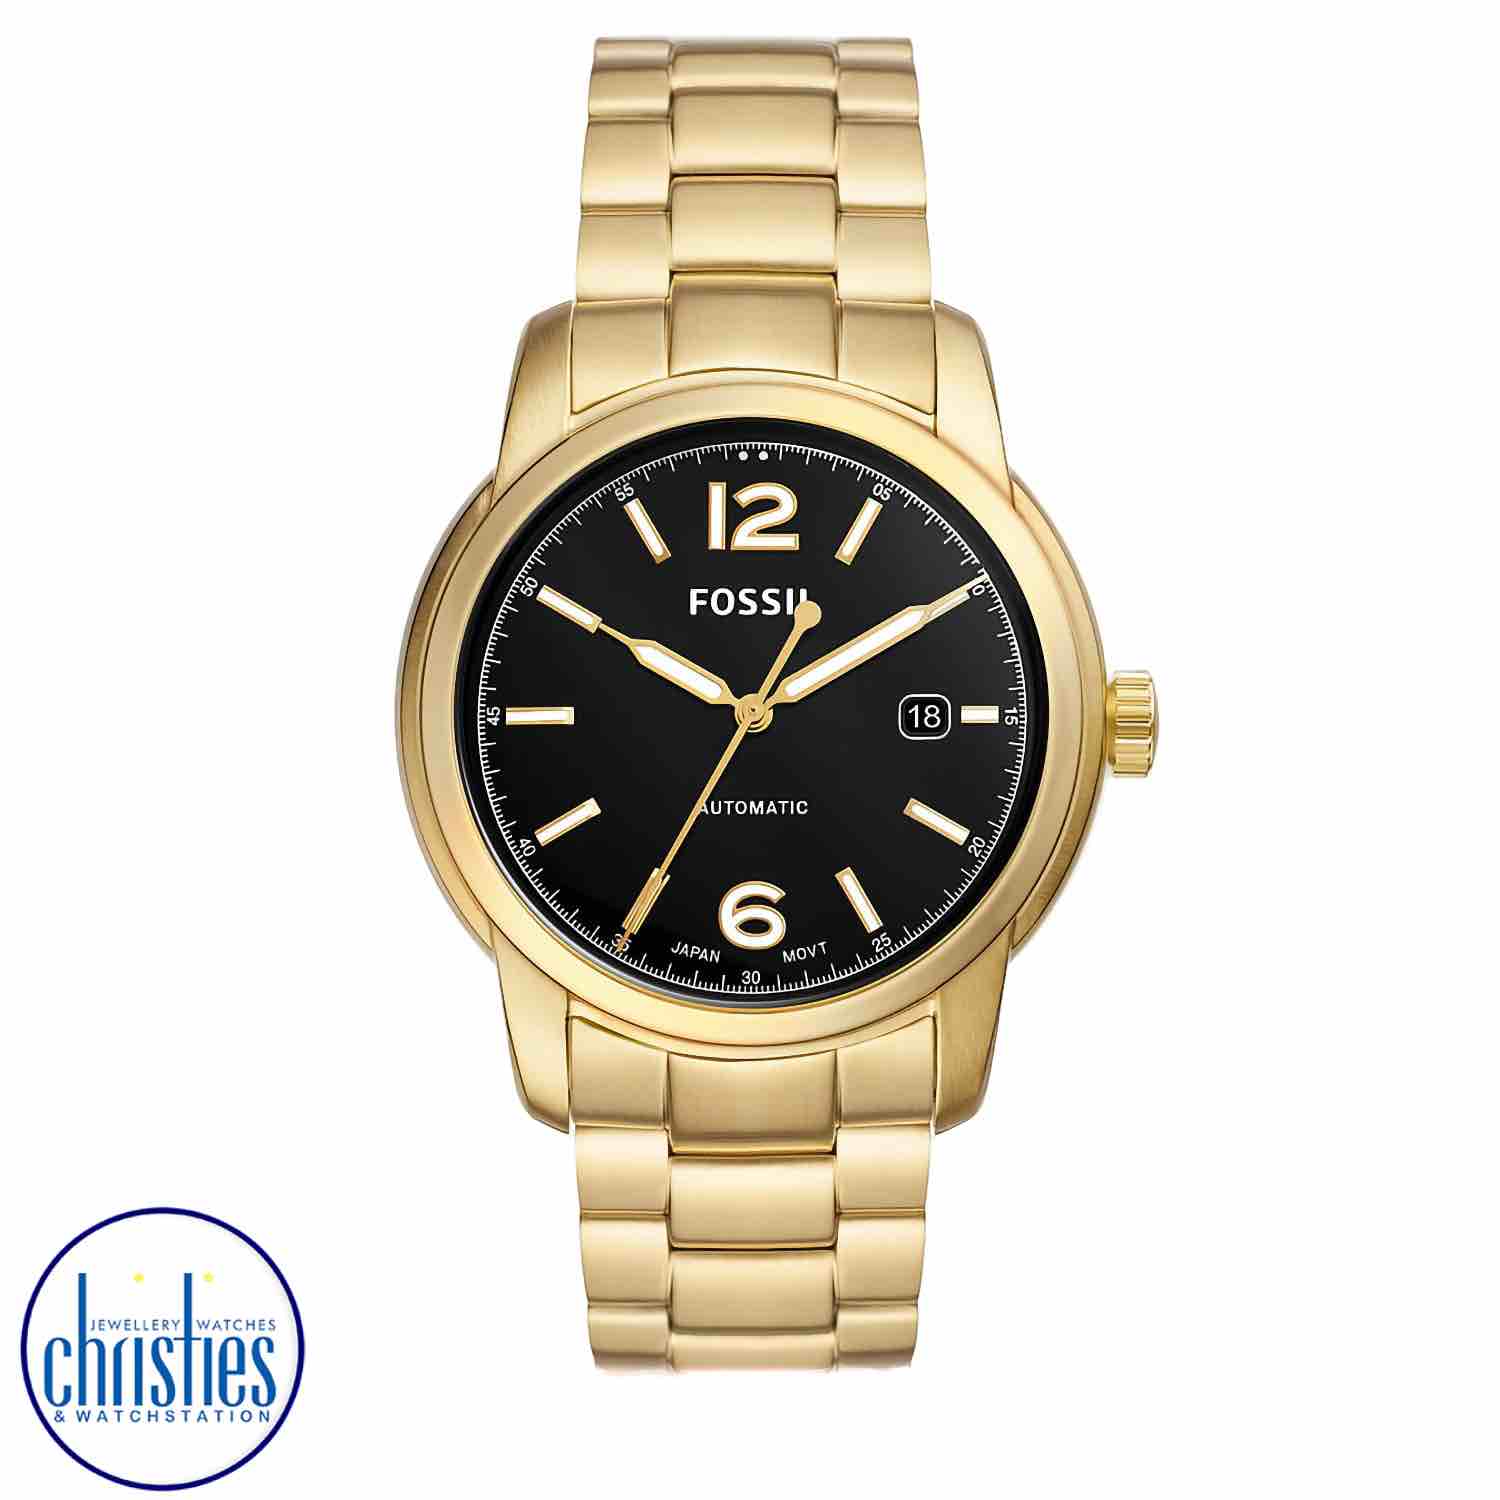 ME3232 Fossil Heritage Automatic Gold-Tone Stainless Steel Watch. ME3240 Fossil 44mm Townsman Automatic Black Leather WatchAfterpay - Split your purchase into 4 instalments - Pay for your purchase over 4 instalments, due every two weeks. fossil mens watch